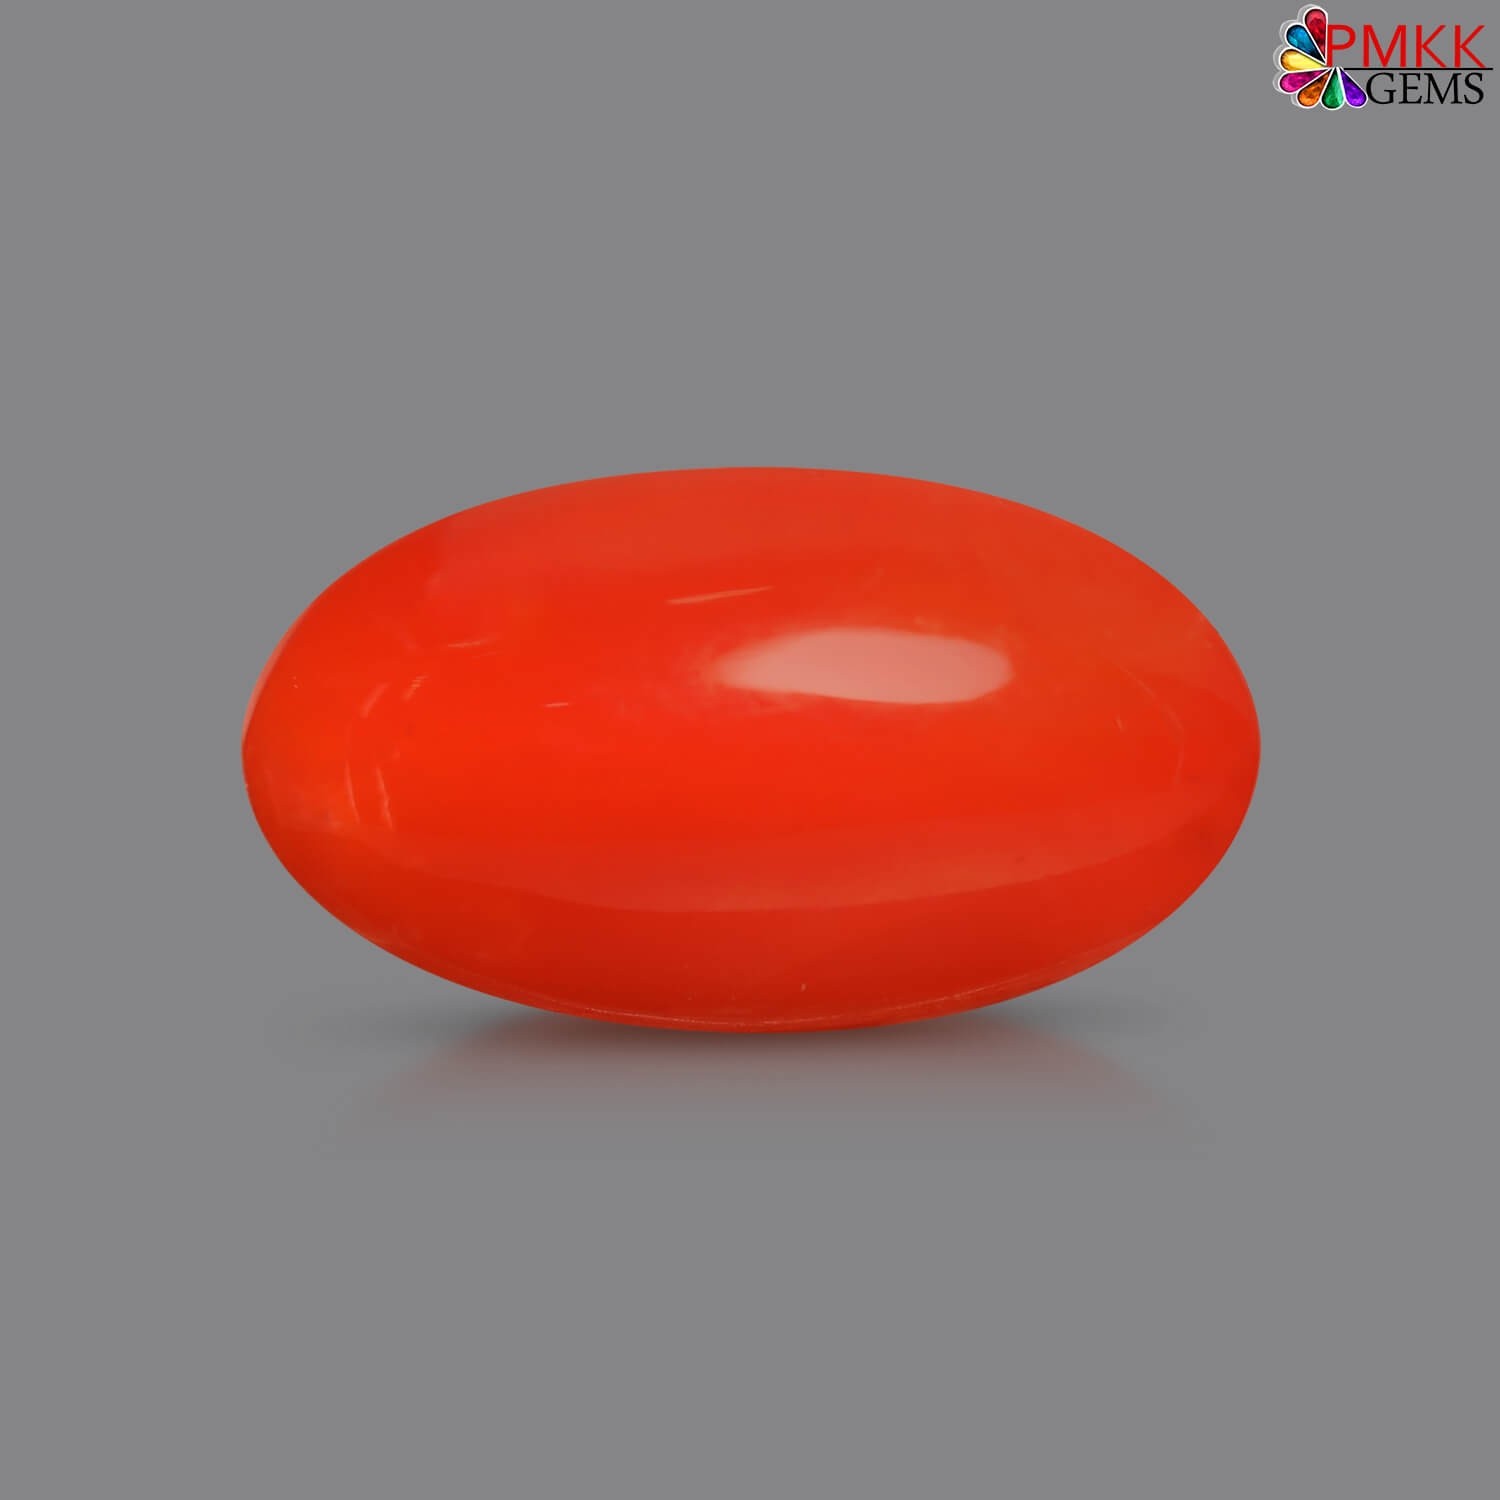 Japanese Red Coral Stone 7.65 Carat